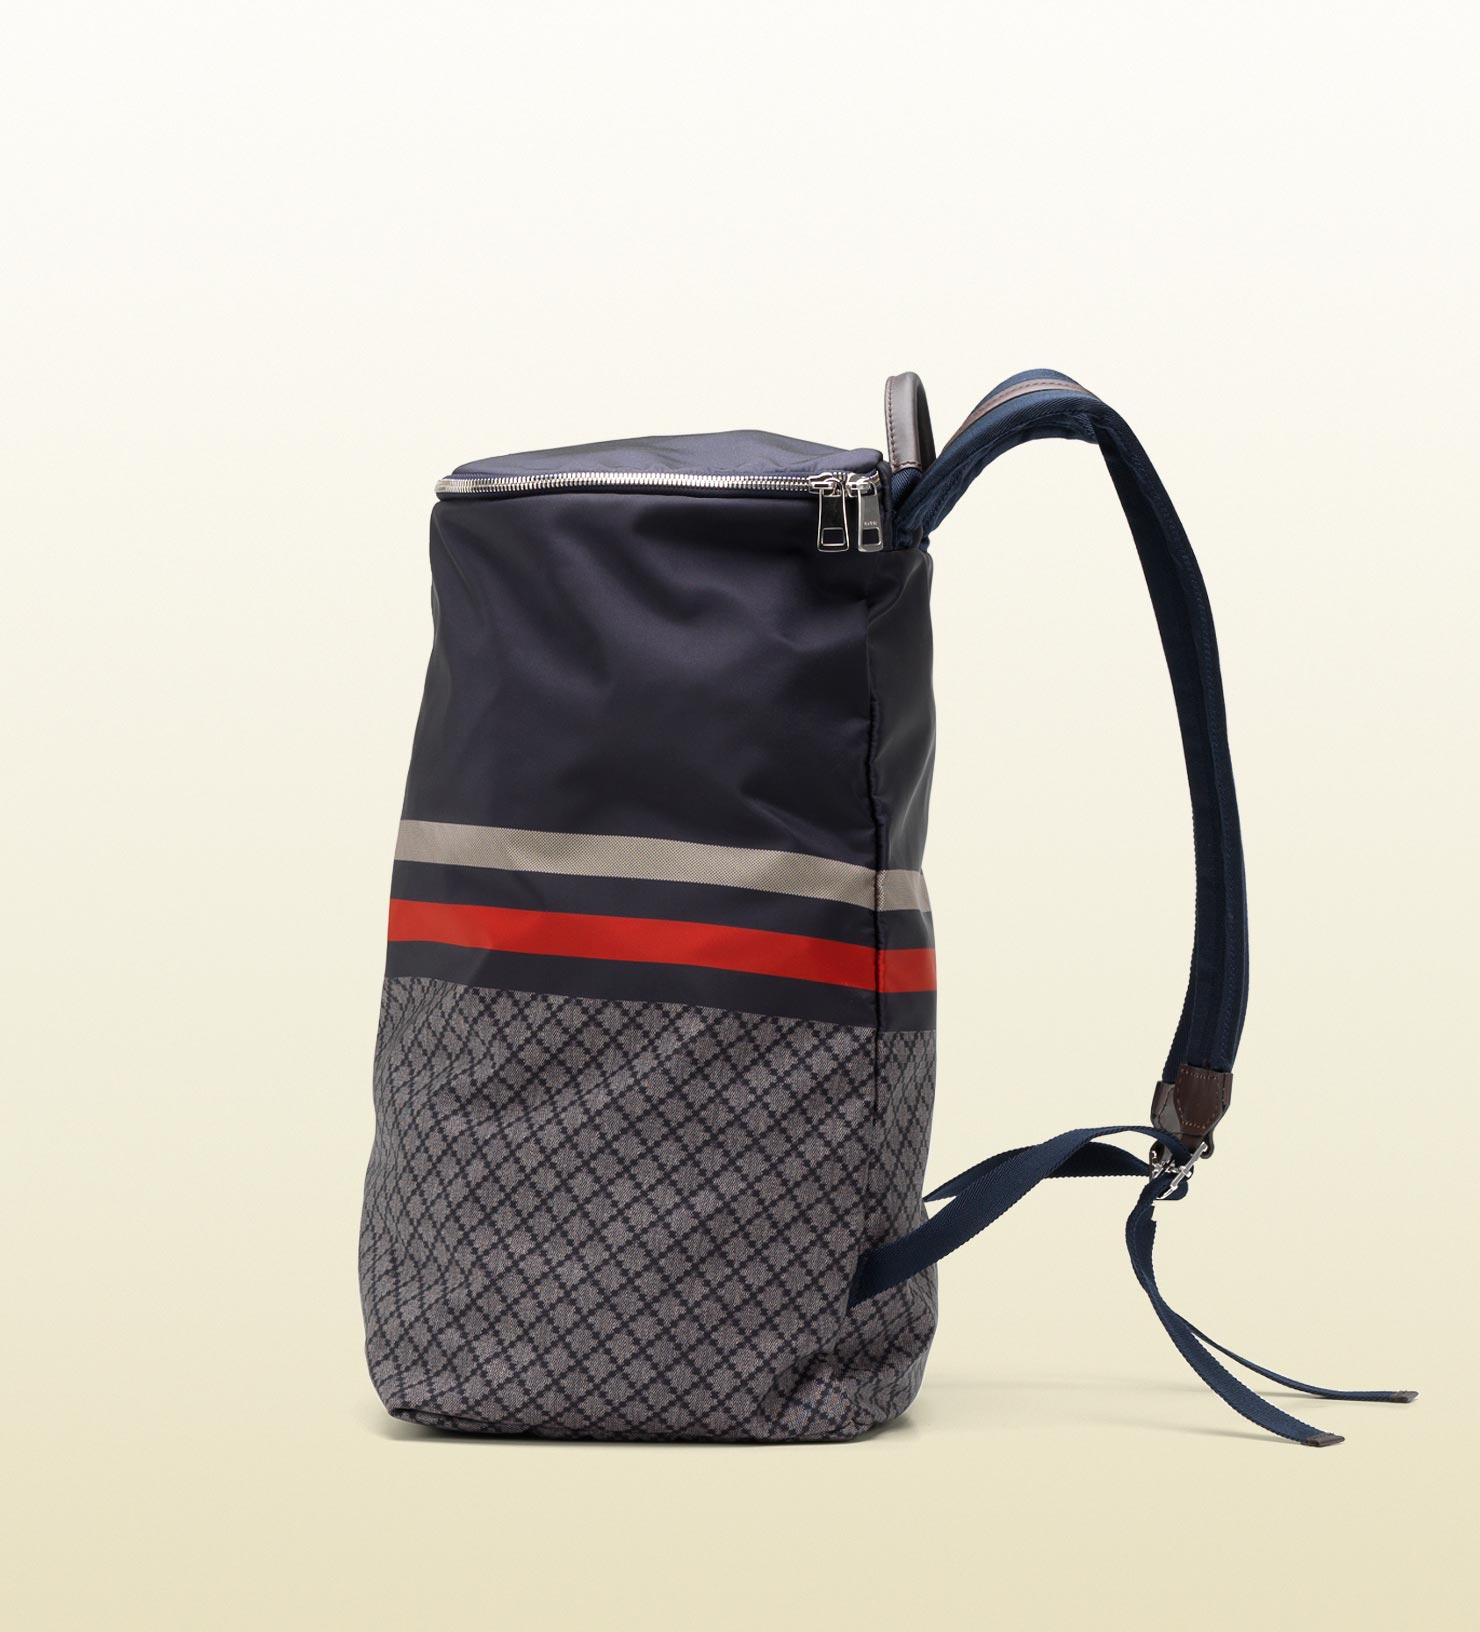 Lyst - Gucci Large Backpack in Blue for Men